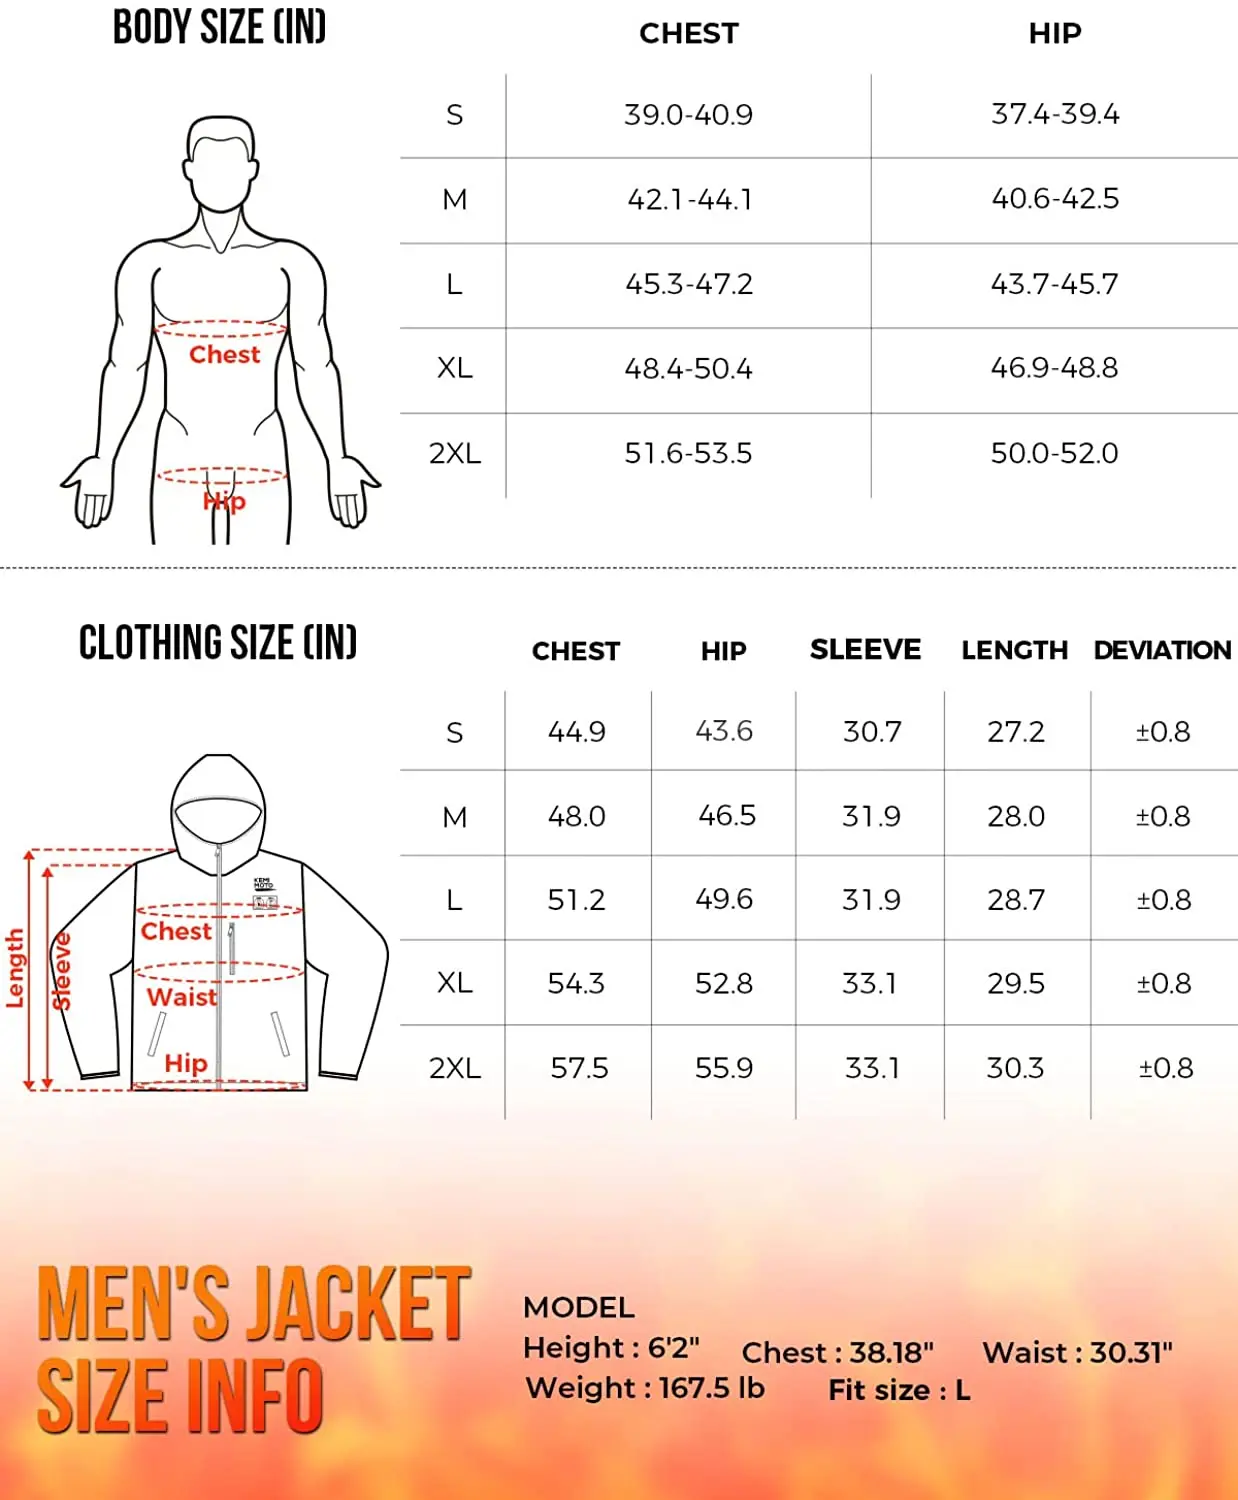 Men's Heated Jacket,  Warming Heating Jacket with Battery Pack Detachable Hood for Hunting Fishing Cycling,XL enlarge